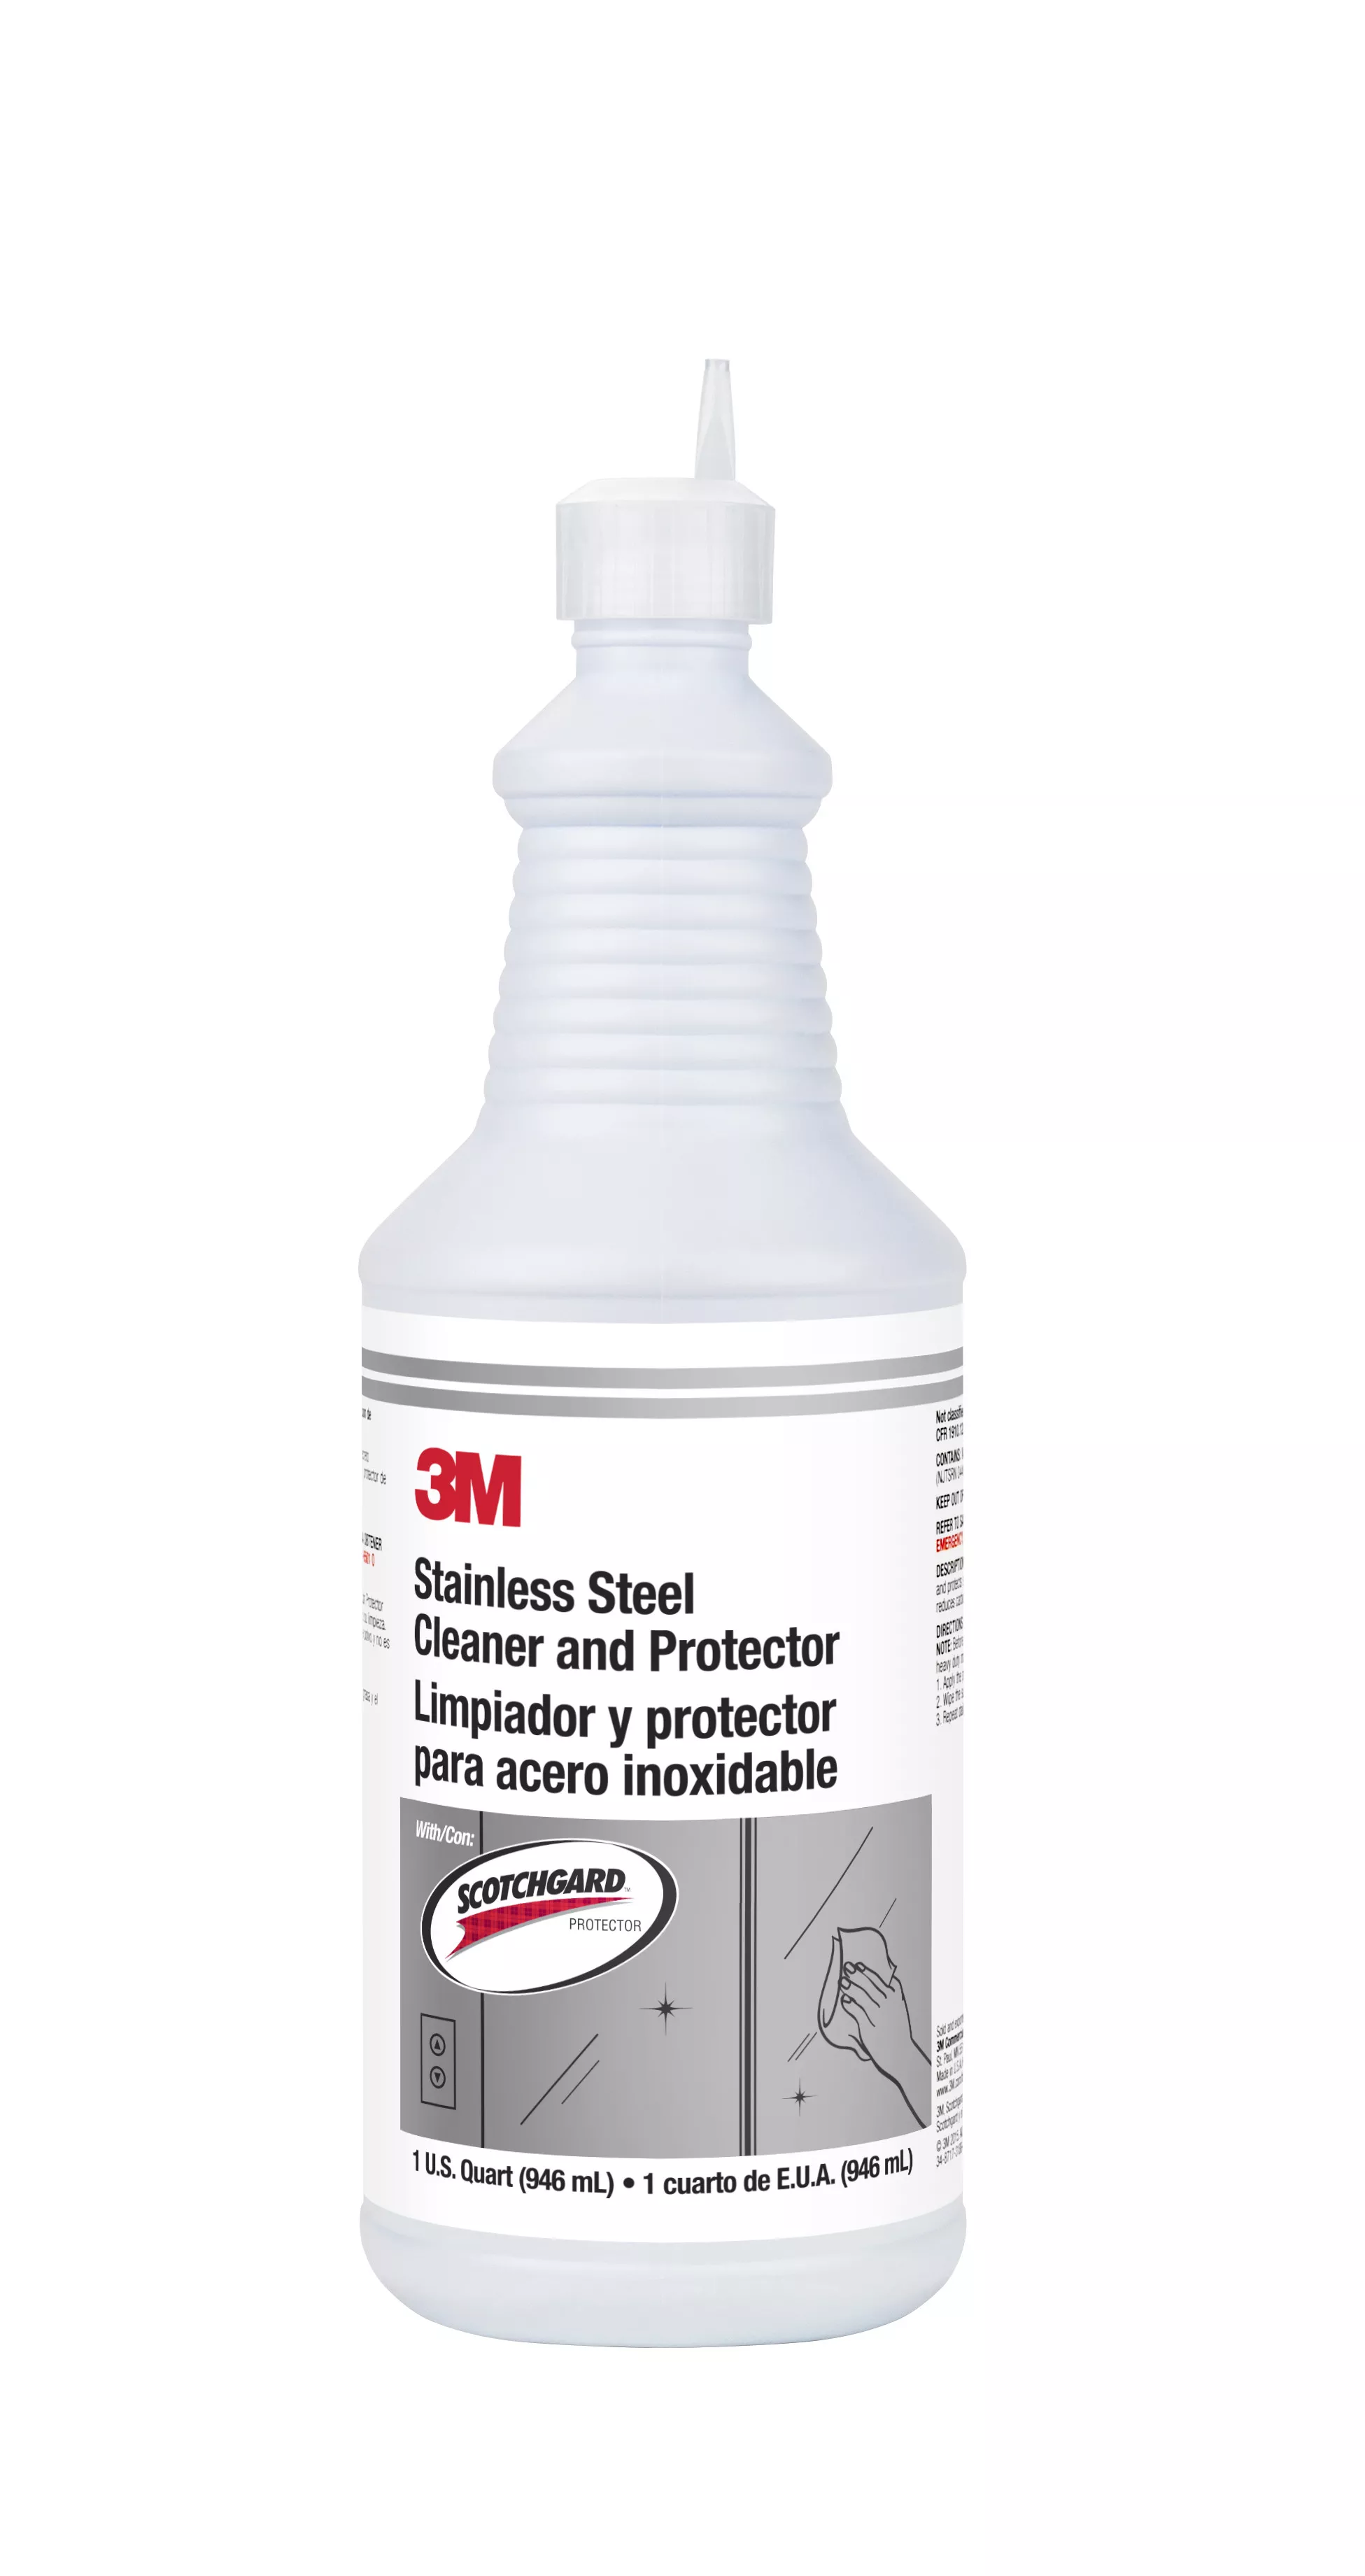 3M™ Stainless Steel Cleaner & Protector With Scotchgard Protector,
Ready-To-Use With Flip-Top Cap, 1 Quart